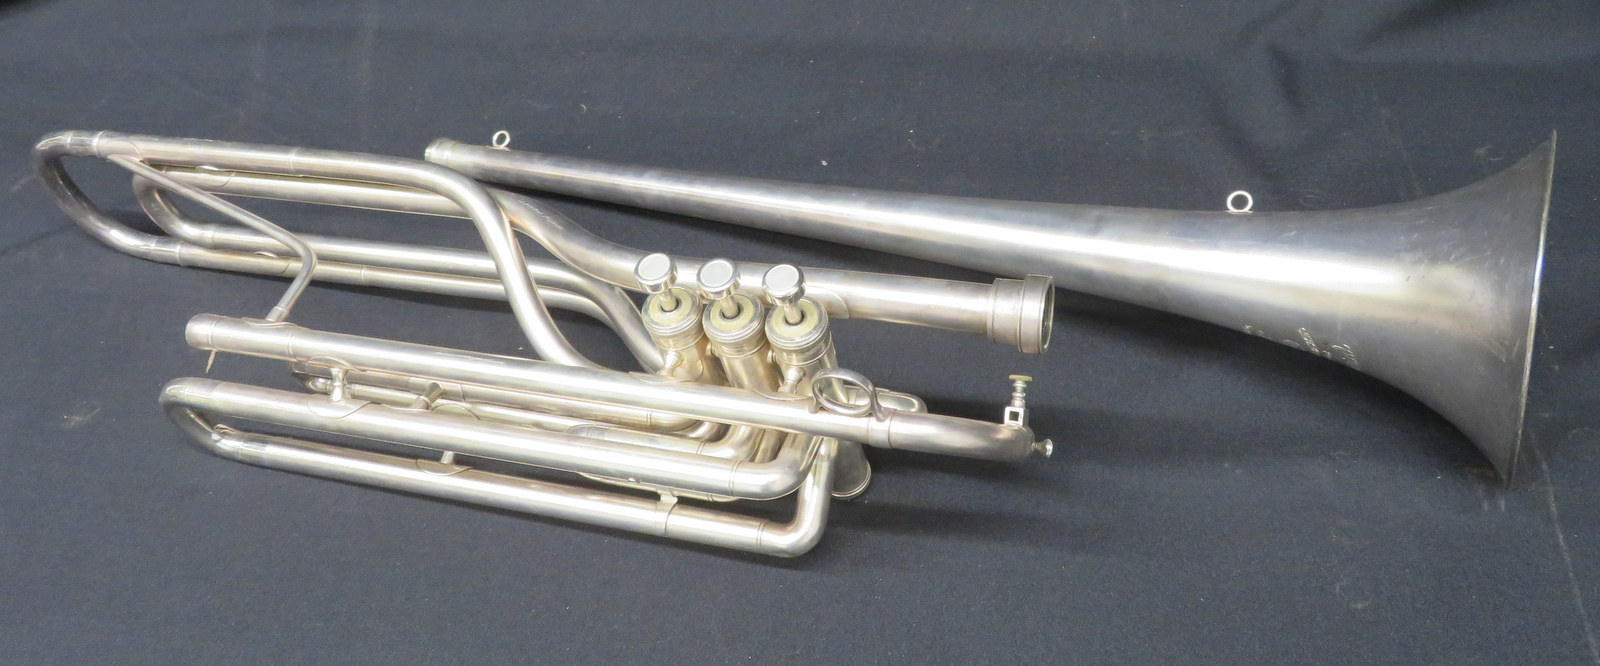 Boosey & Hawkes Imperial bass fanfare trumpet with case. Serial number: 632450. - Image 15 of 17